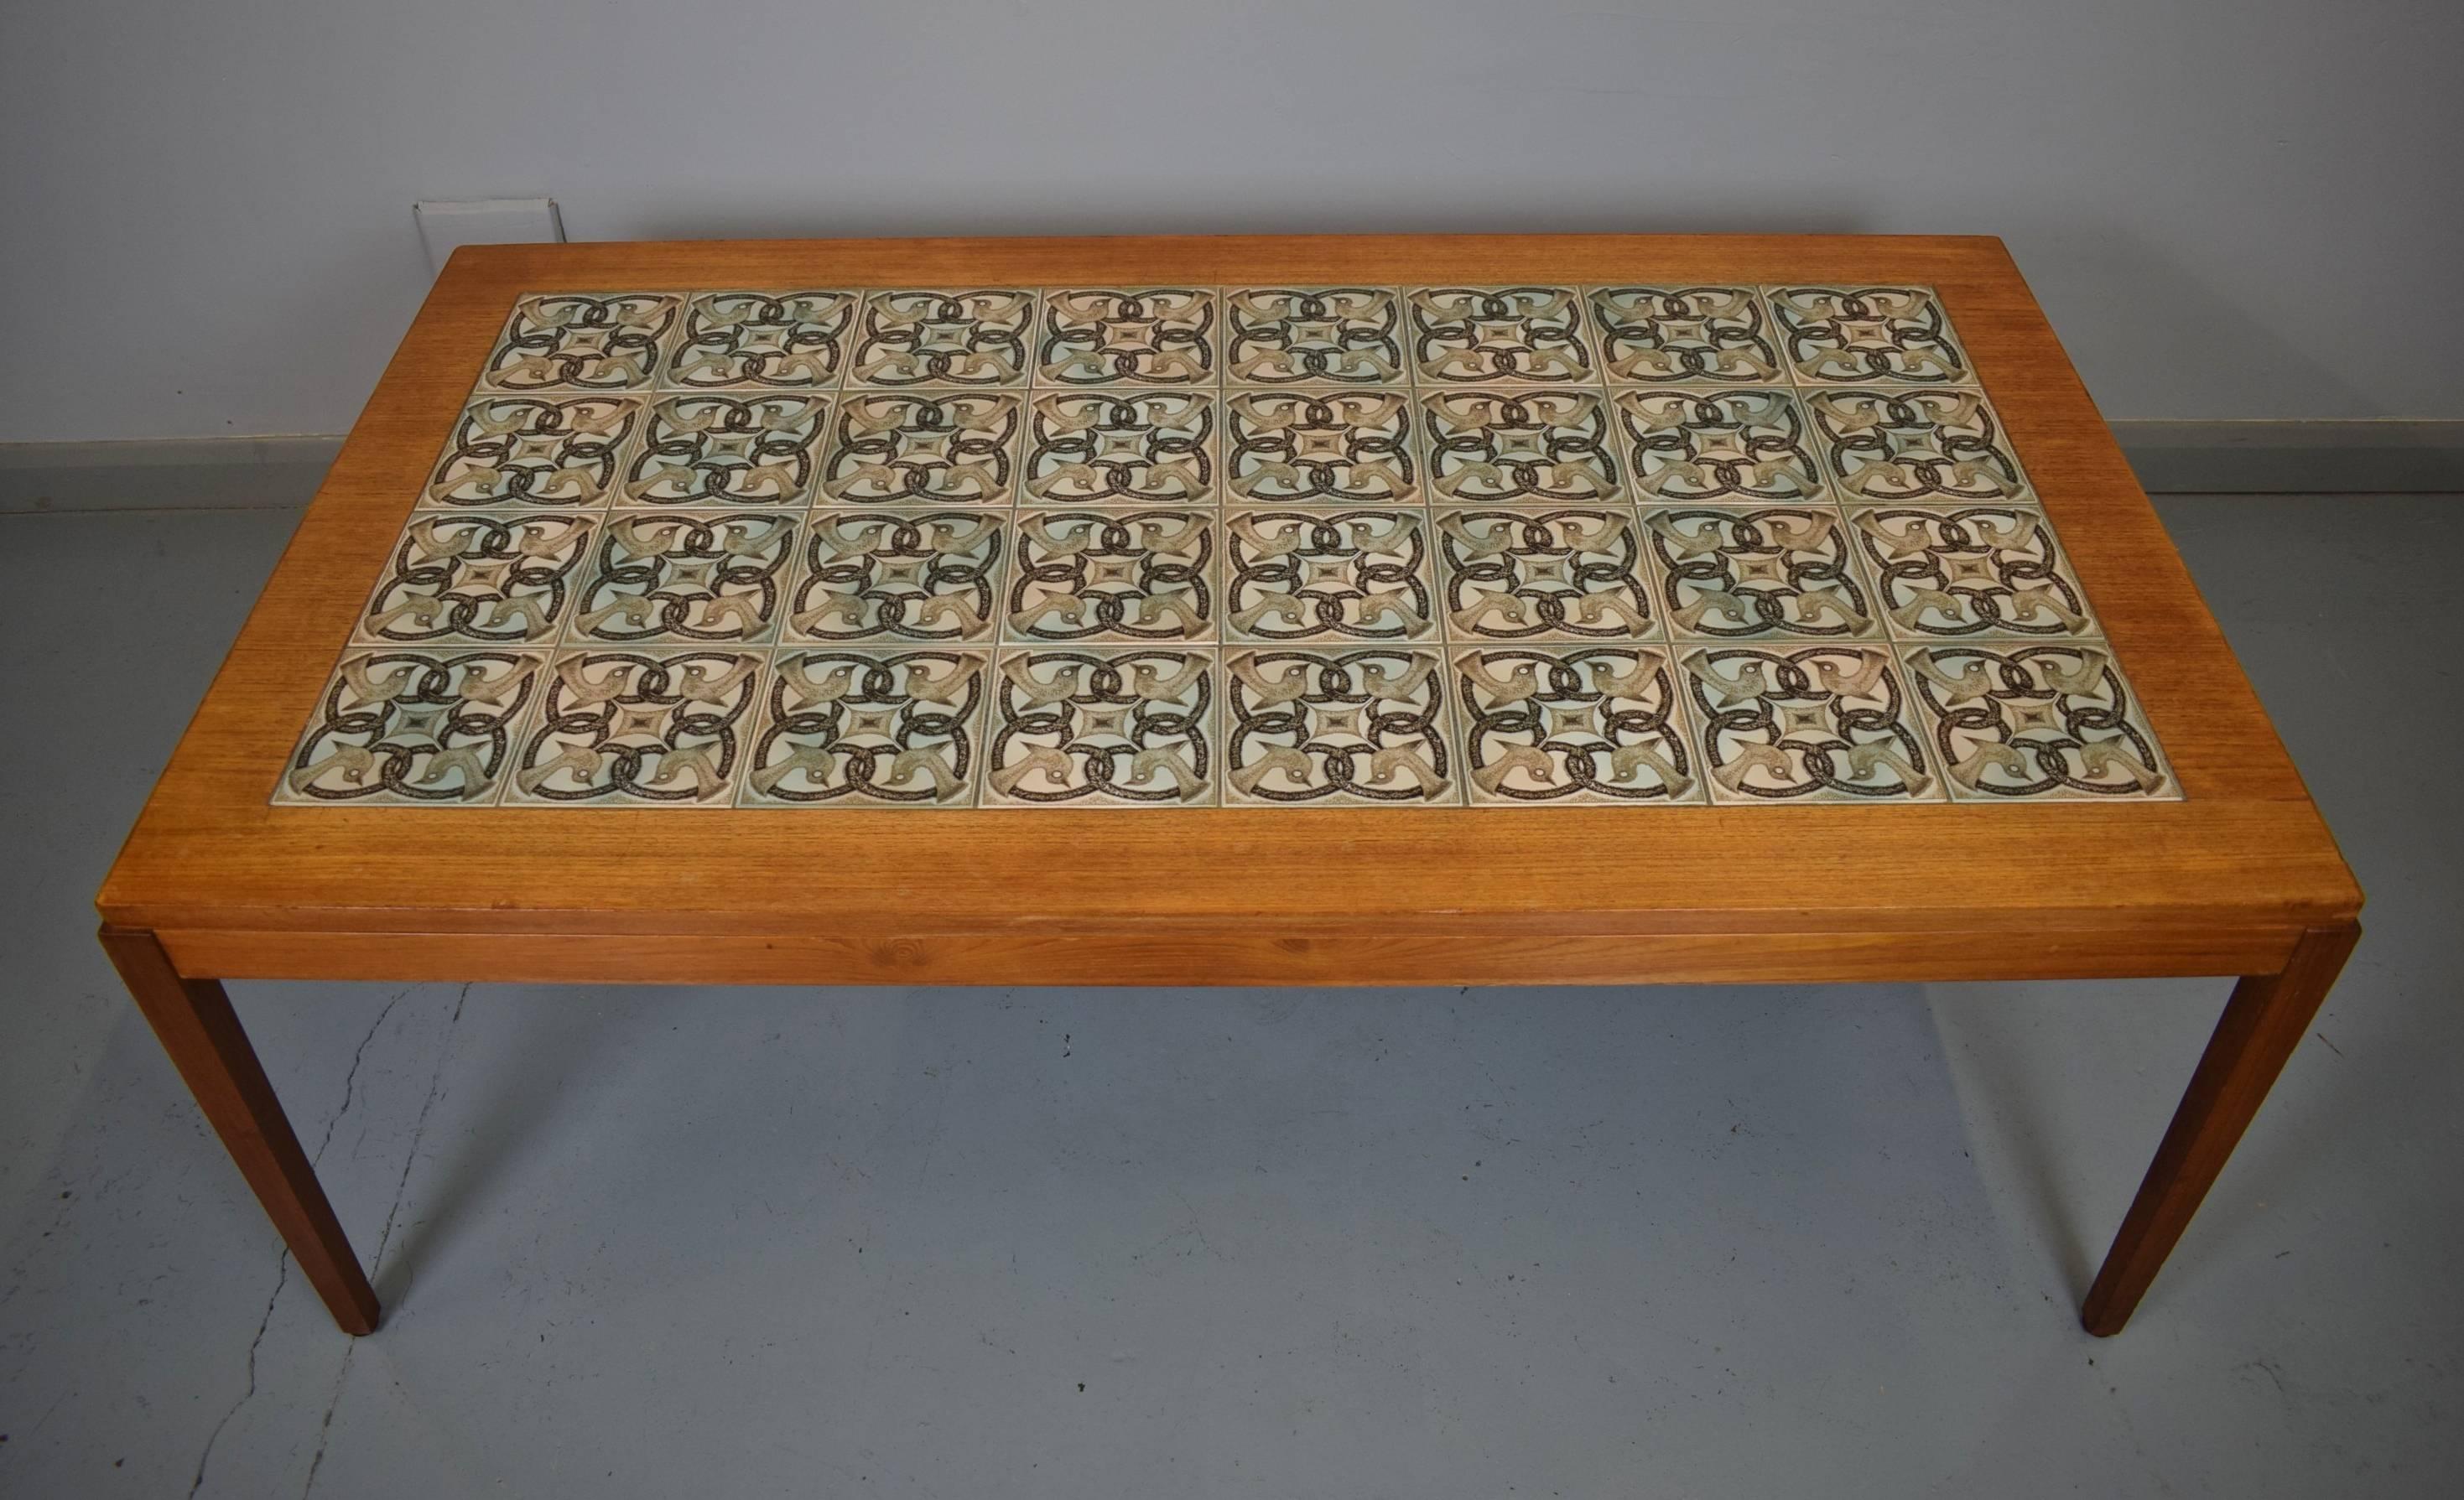 Designer: Danish Design

Manufacturer: Haslev & Royal Copehagen Porcelain

Country: Denmark

Date: 1960s

Material: Teak and procelain

Maximum Dimensions: Width 140 cm, depth 79 cm and height 53 cm

Condition: Excellent with only small